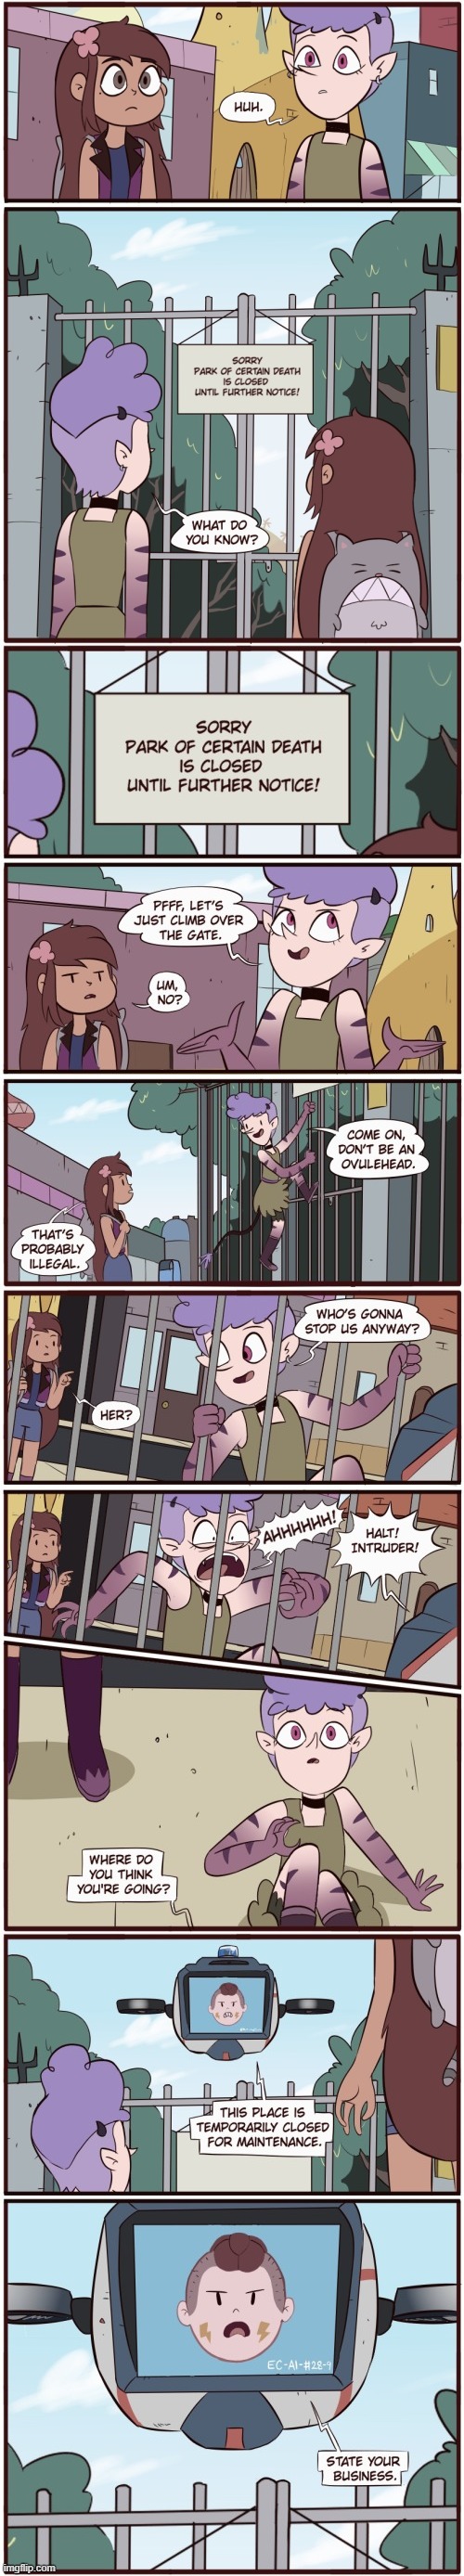 Echo Creek: A Tale of Two Butterflies: Chapter 2: The Half Way (Part 6) | image tagged in morningmark,svtfoe,comics/cartoons,star vs the forces of evil,comics,memes | made w/ Imgflip meme maker